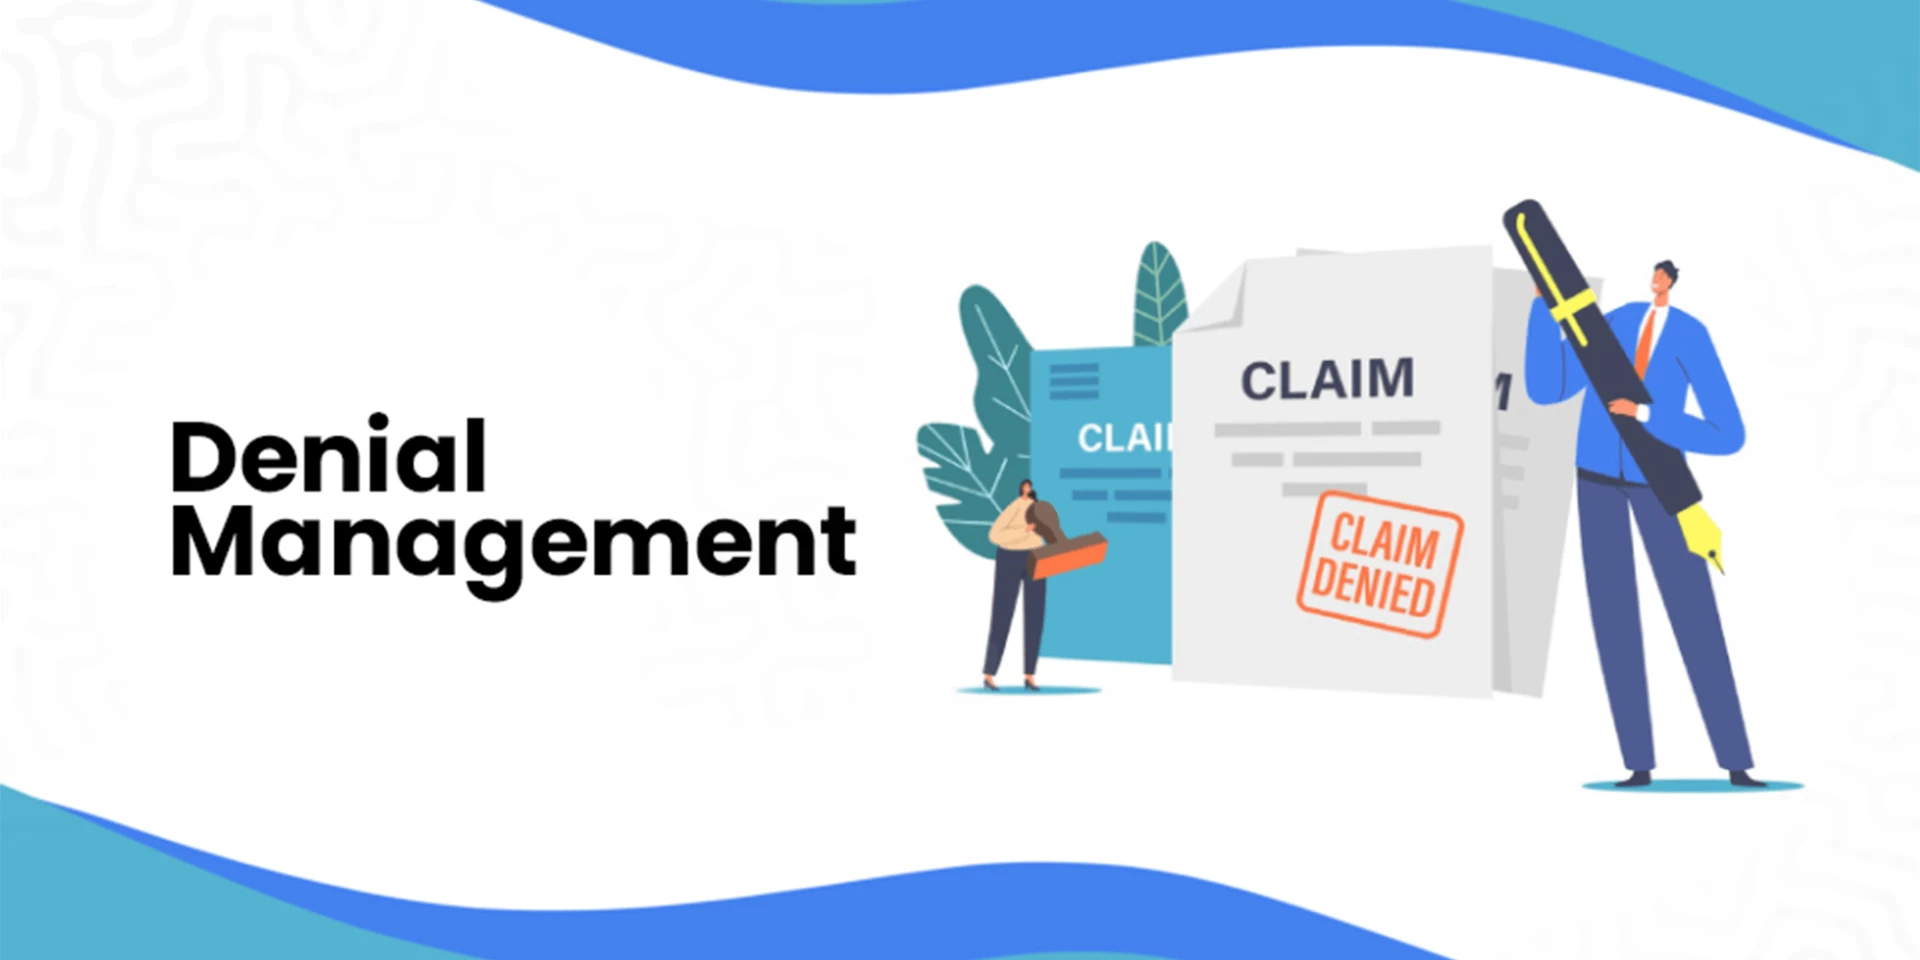 Streamlining Claim Denial Management Process for Pain Management Groups